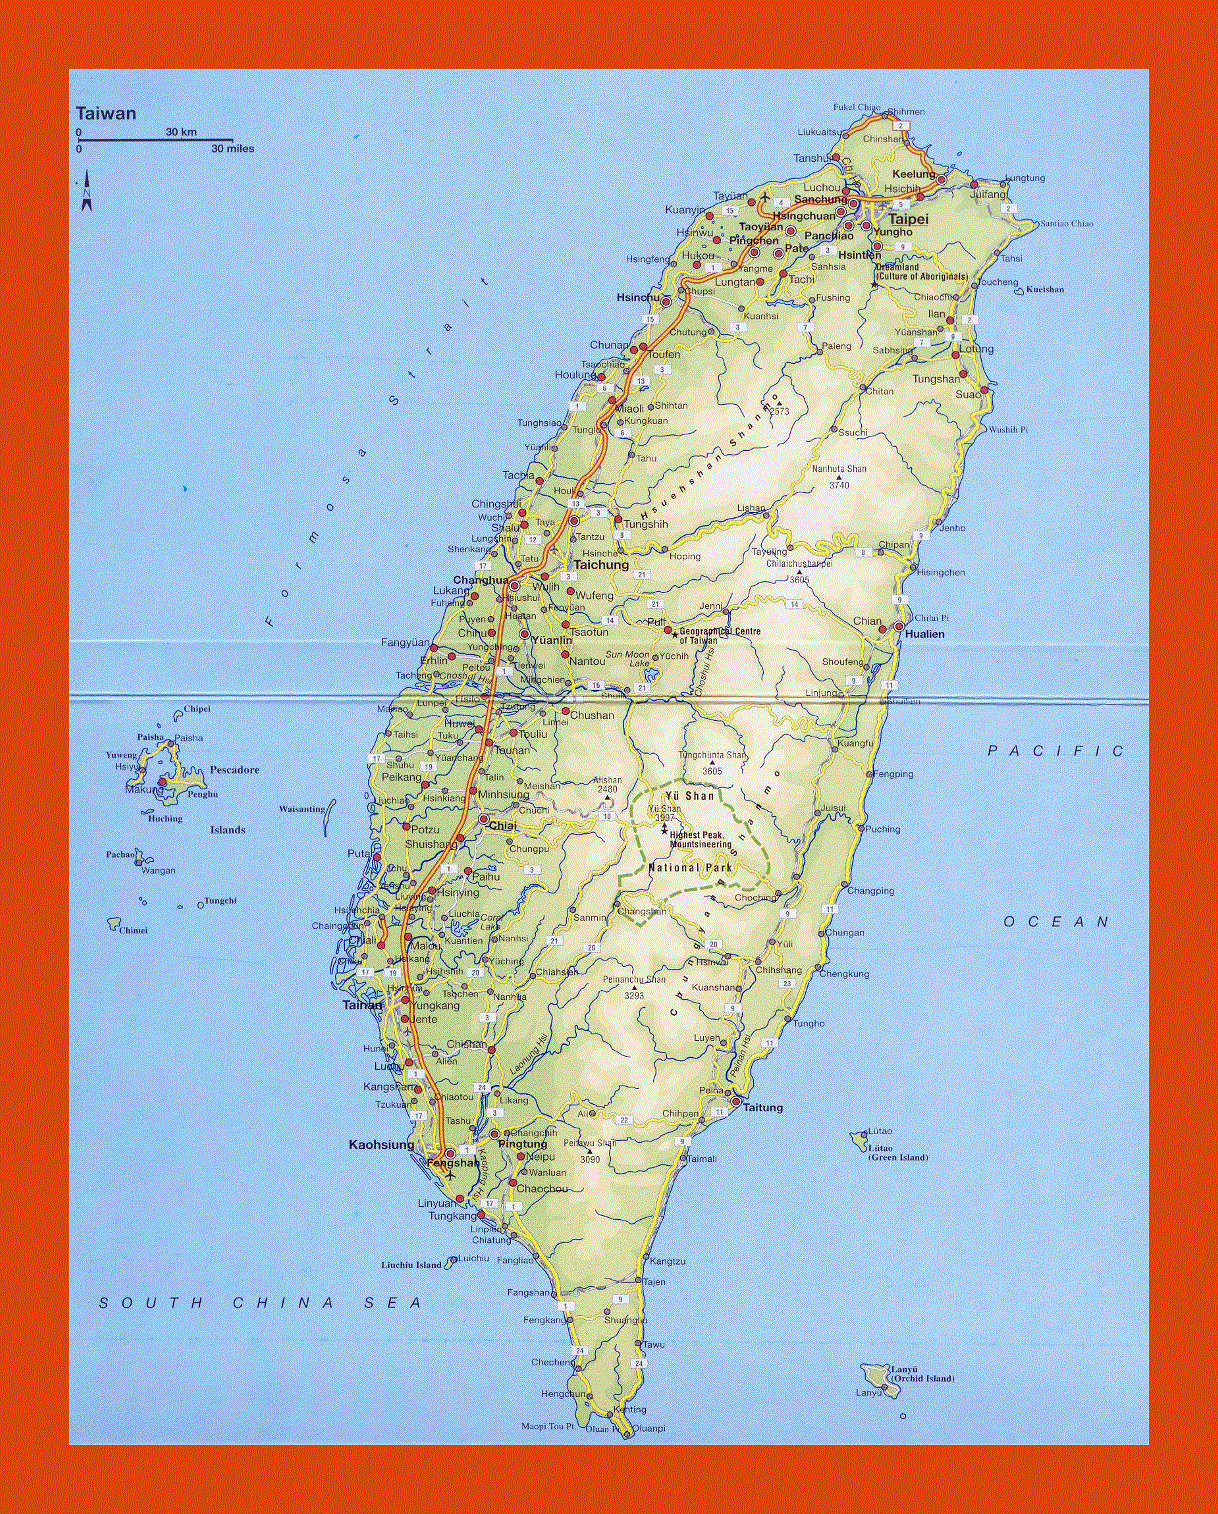 Road and elevation map of Taiwan